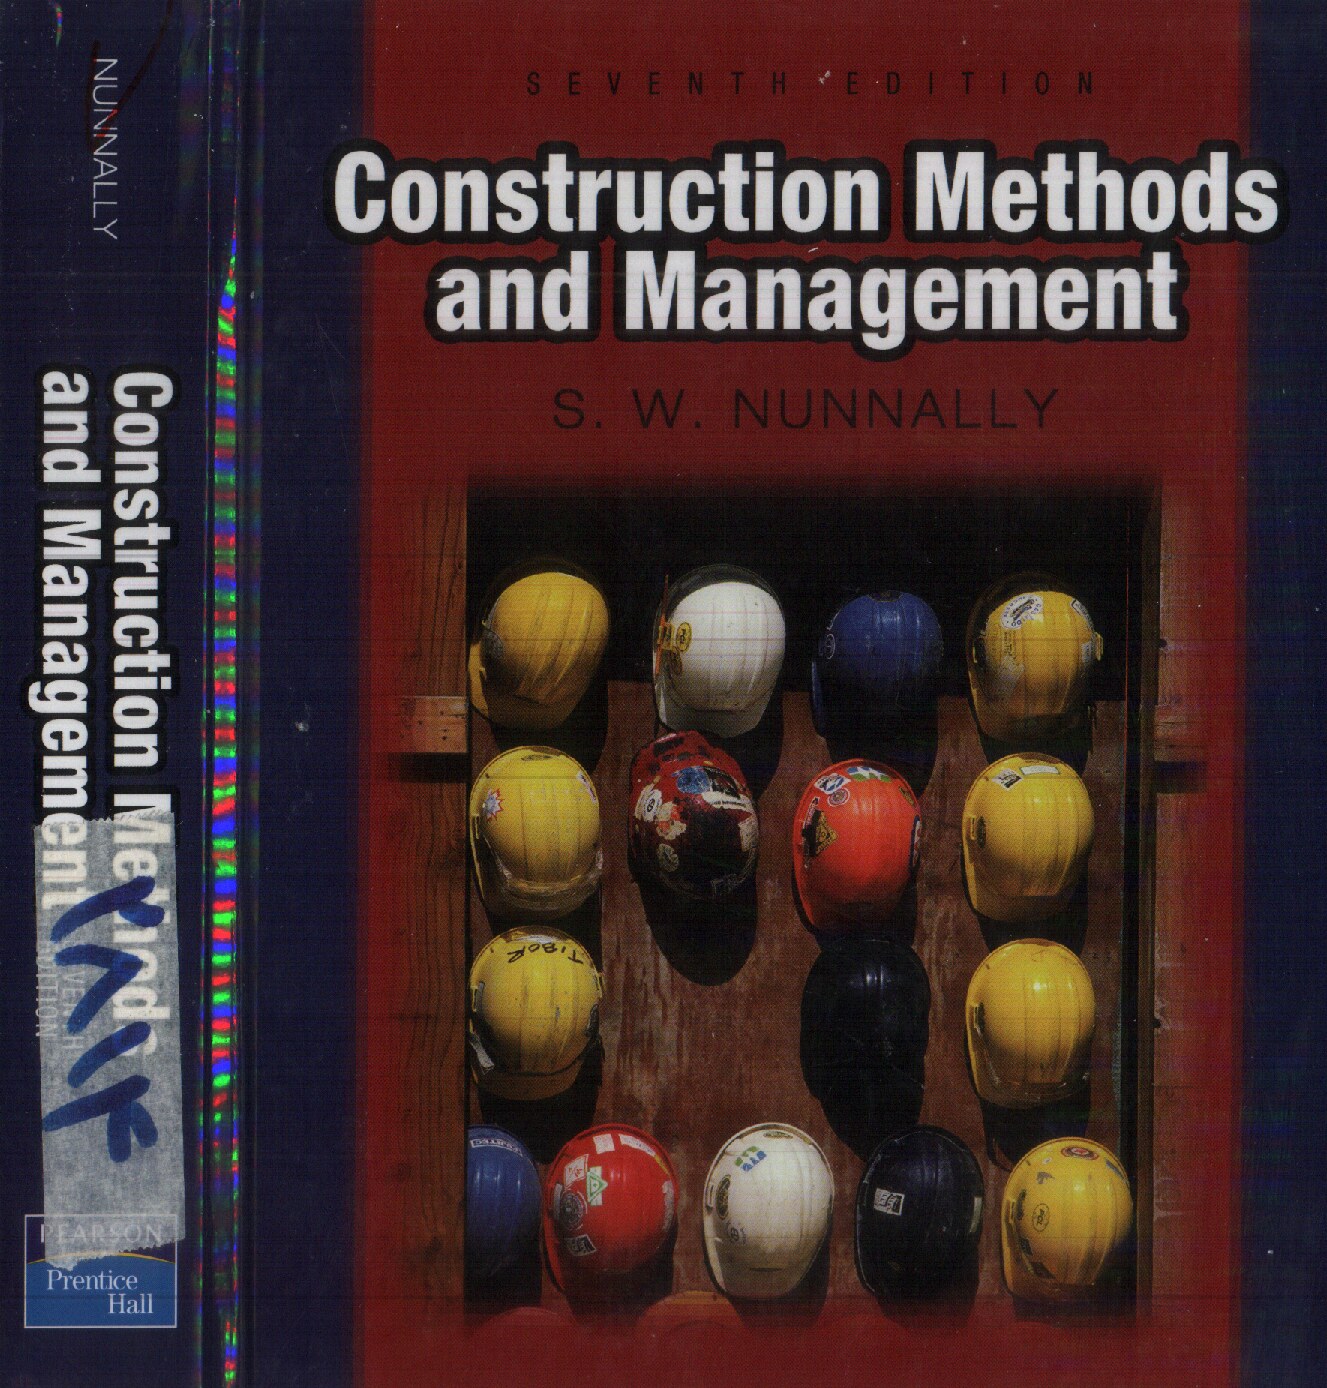 -Construction Methods and Management by S. W. Nunnally_ 7th Edition_ 2007